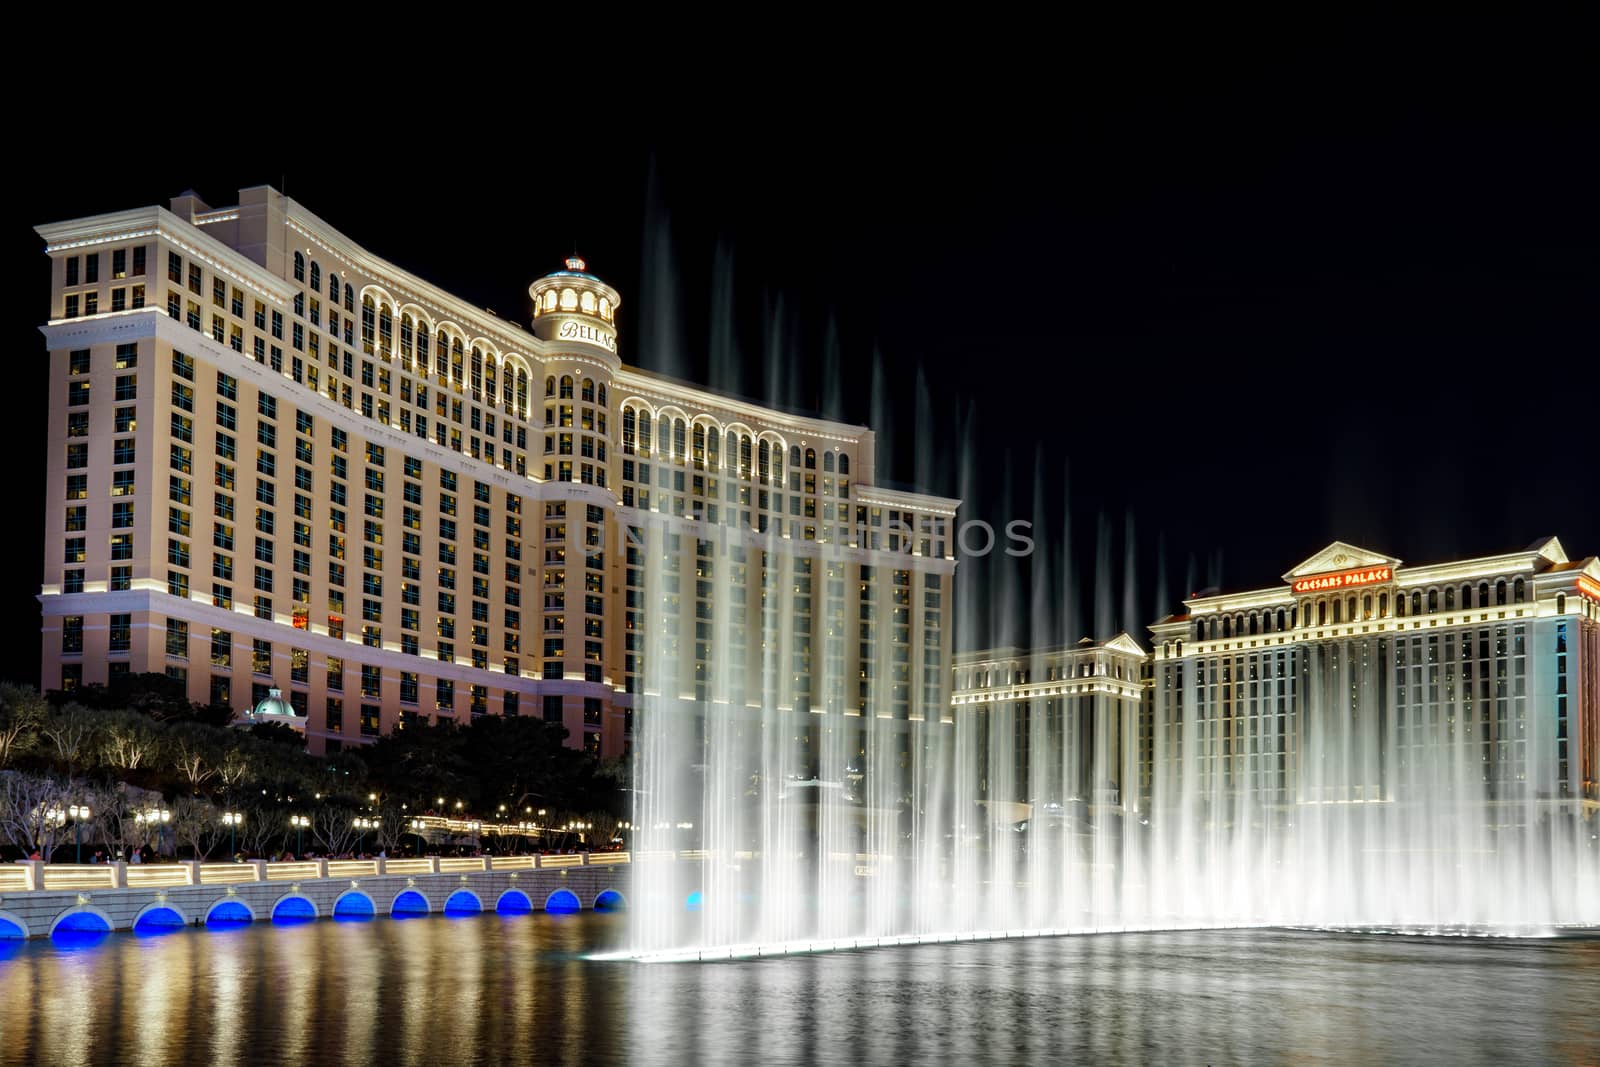 LAS VEGAS, NV/USA - FEBRUARY 13, 2016: Night music fountain at the The Bellagio hotel and casino on the Las Vegas Strip. The Bellagio is owned and operated by MGM Resorts International.